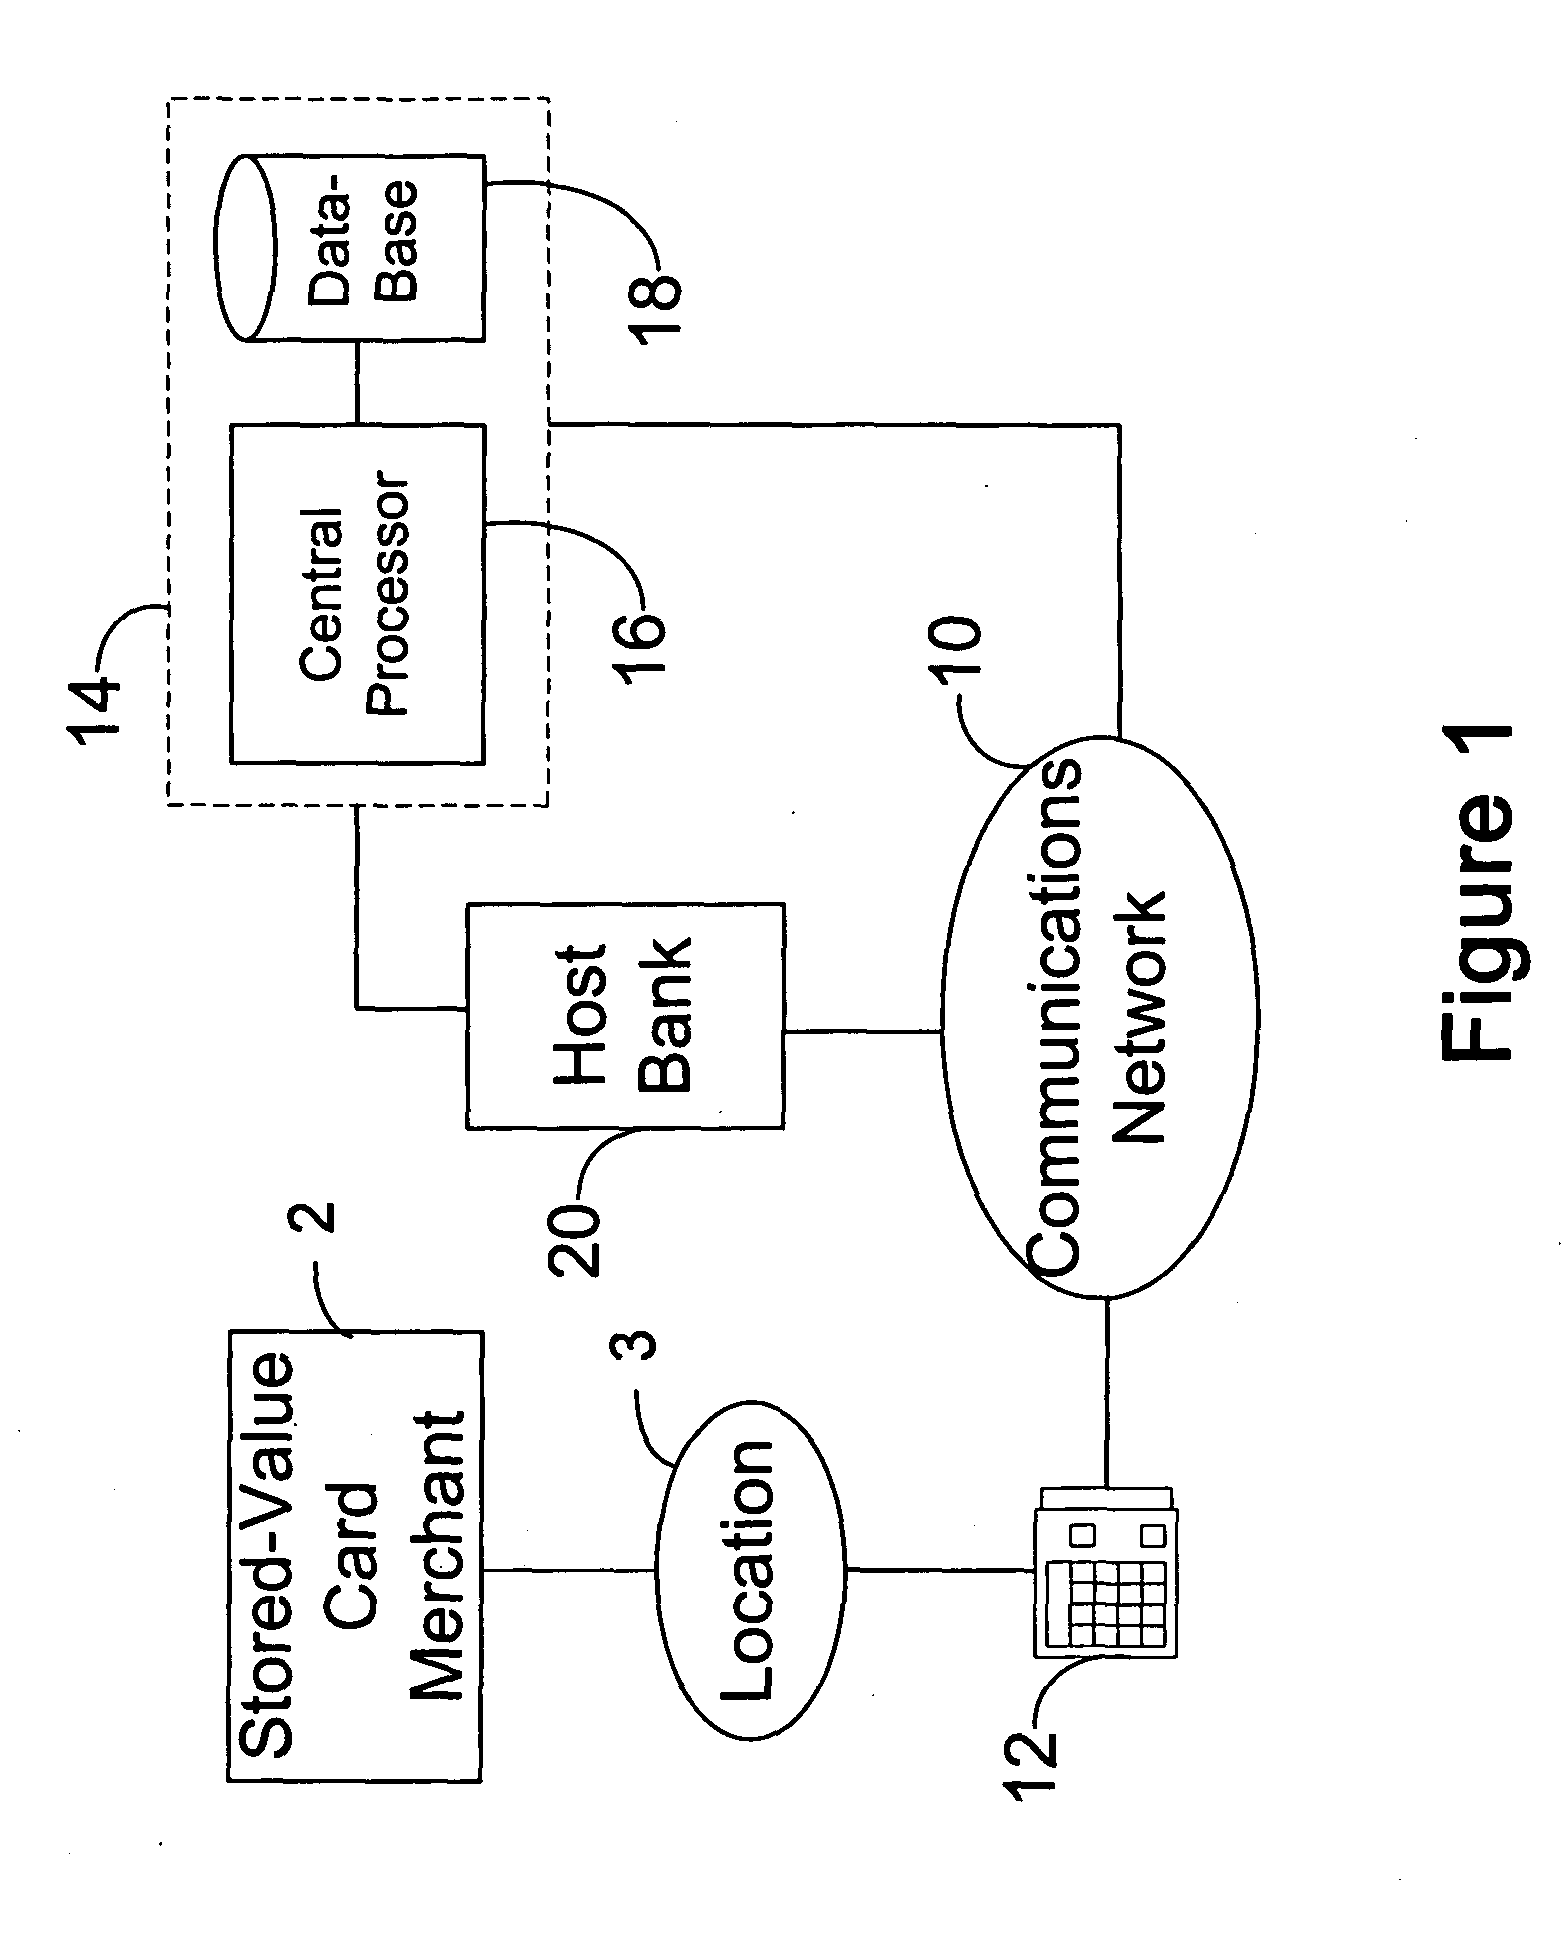 System and method for securely authorizing and distributing stored-value card data